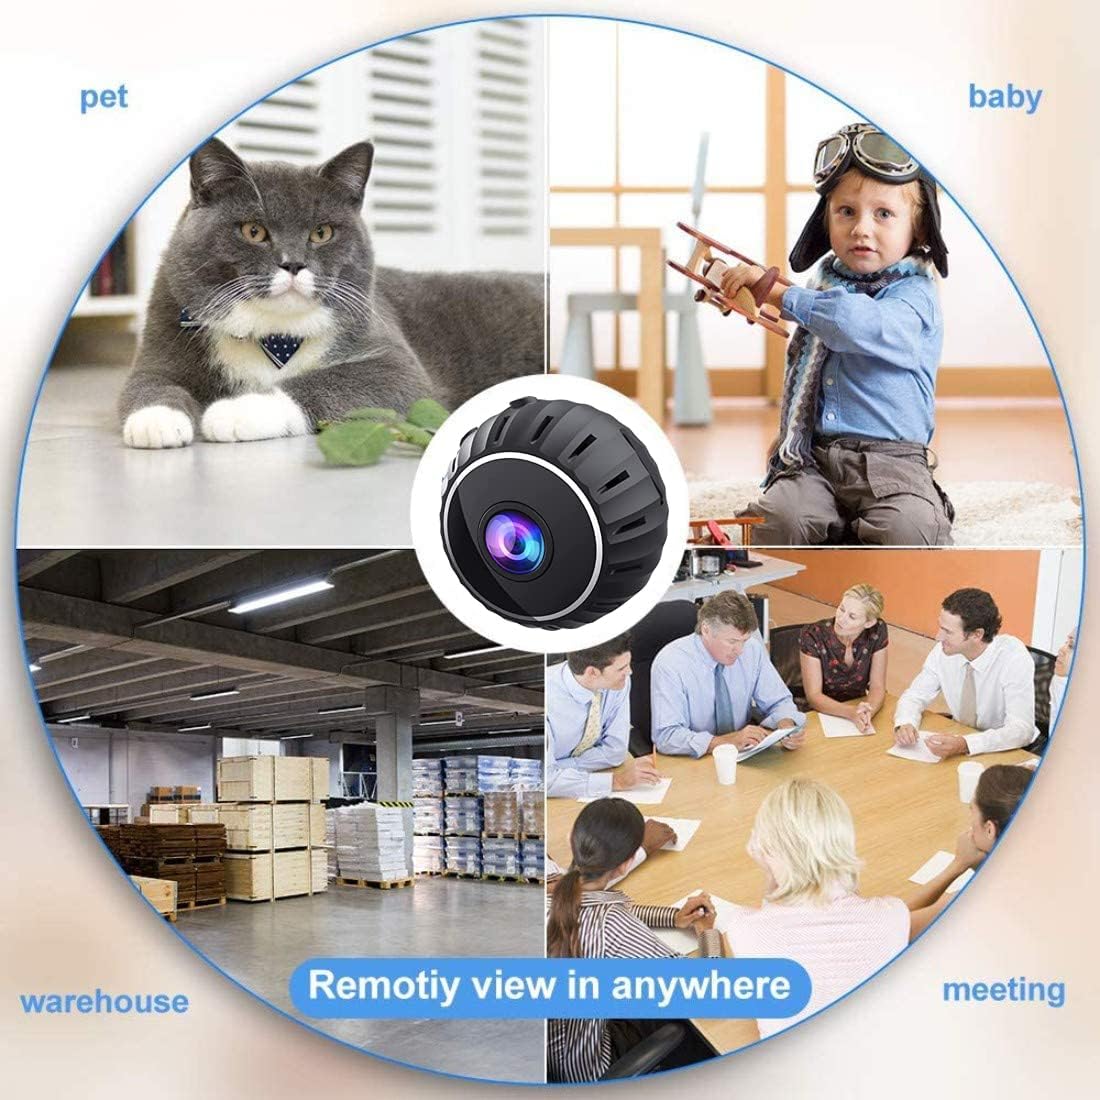 Security-Cameras-Mini-Camera-for-Home-Security-1080p-HD-Mini-IR-Camera-WiFi-Wireless-Small-Indoor-Nanny-Camera-Cell-Phone-APP-Control-with-A-Wide-Angle-Remote-View-18